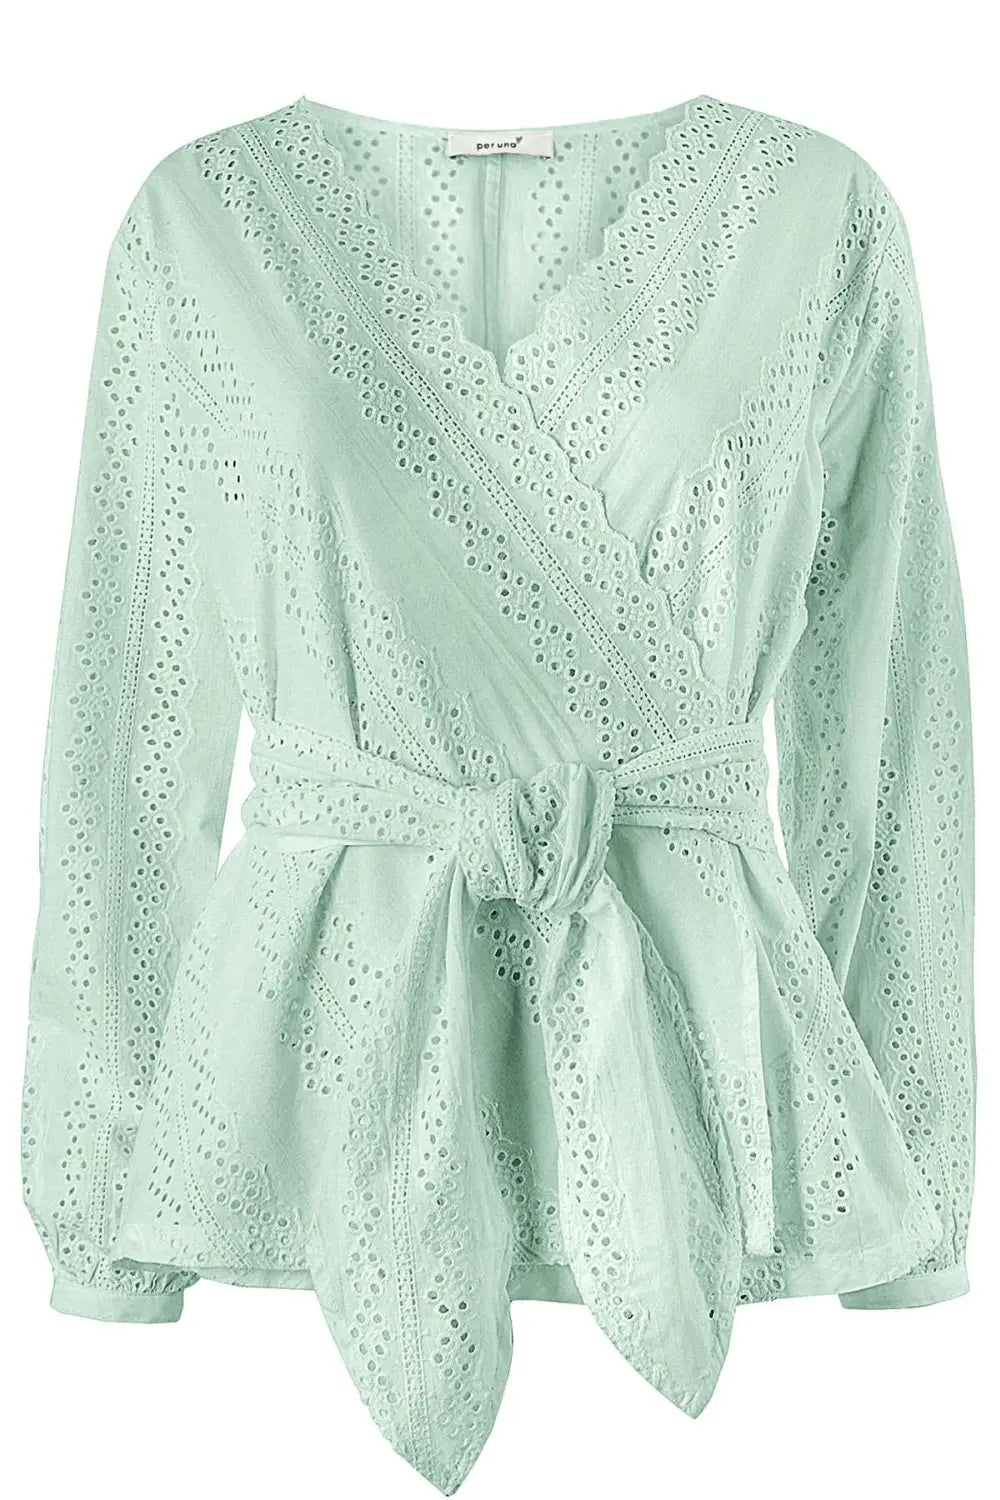 M&S Per Una Broderie Anglais Wrap Blouse Pale Green / 8